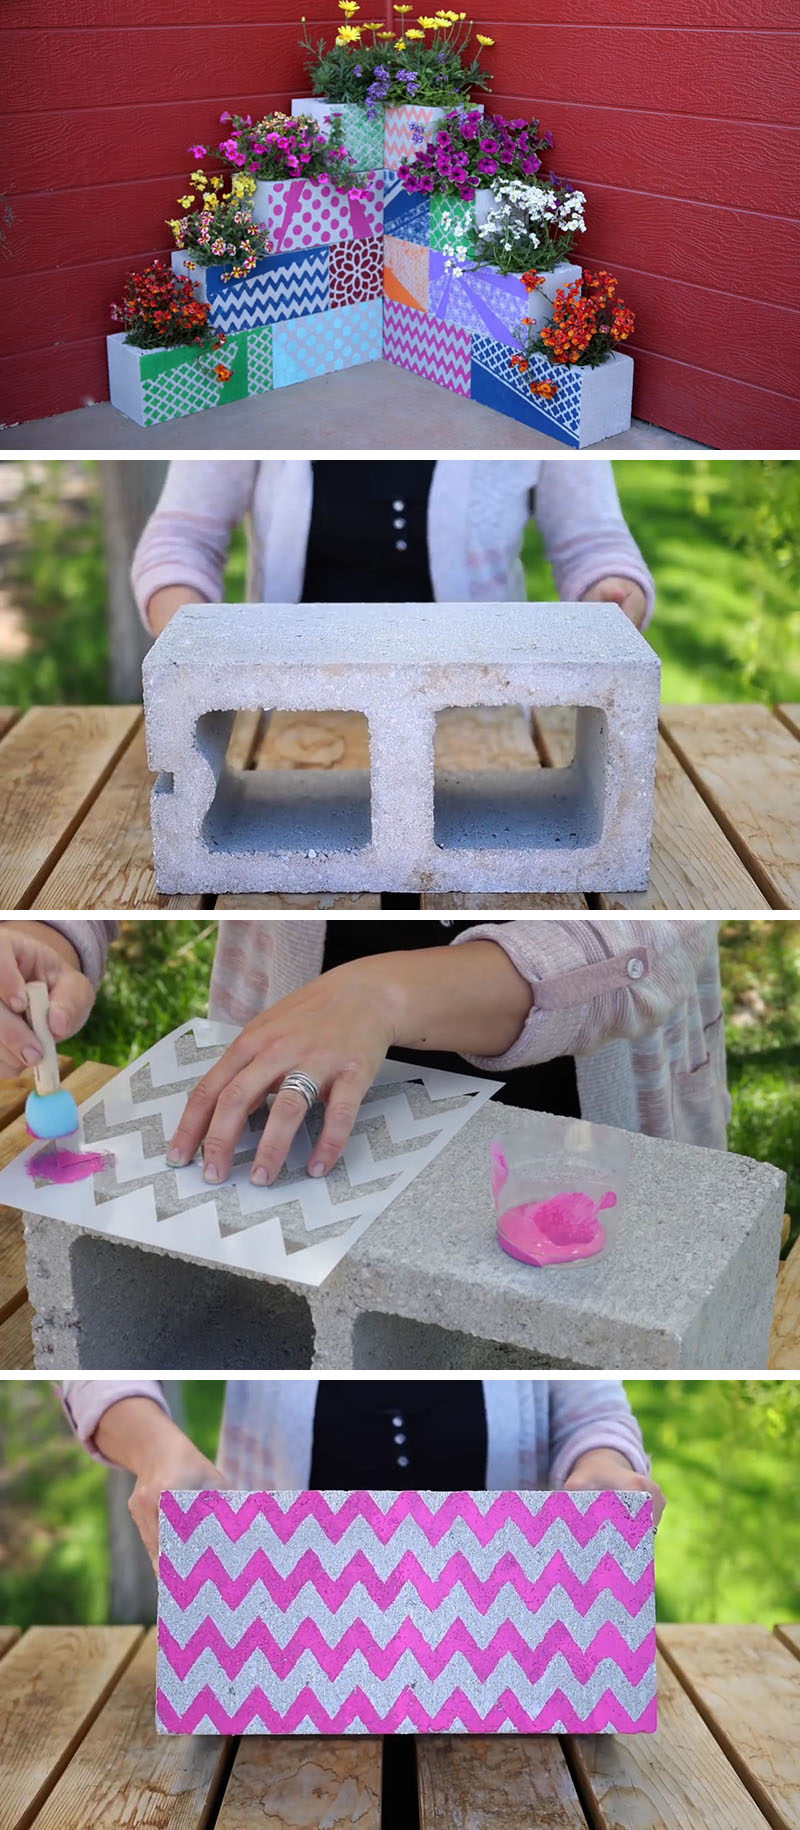 Make your own inexpensive, colorful, modern and fully customizable DIY outdoor planter perfect for succulents, using cinder blocks, stencils, paint and plants.